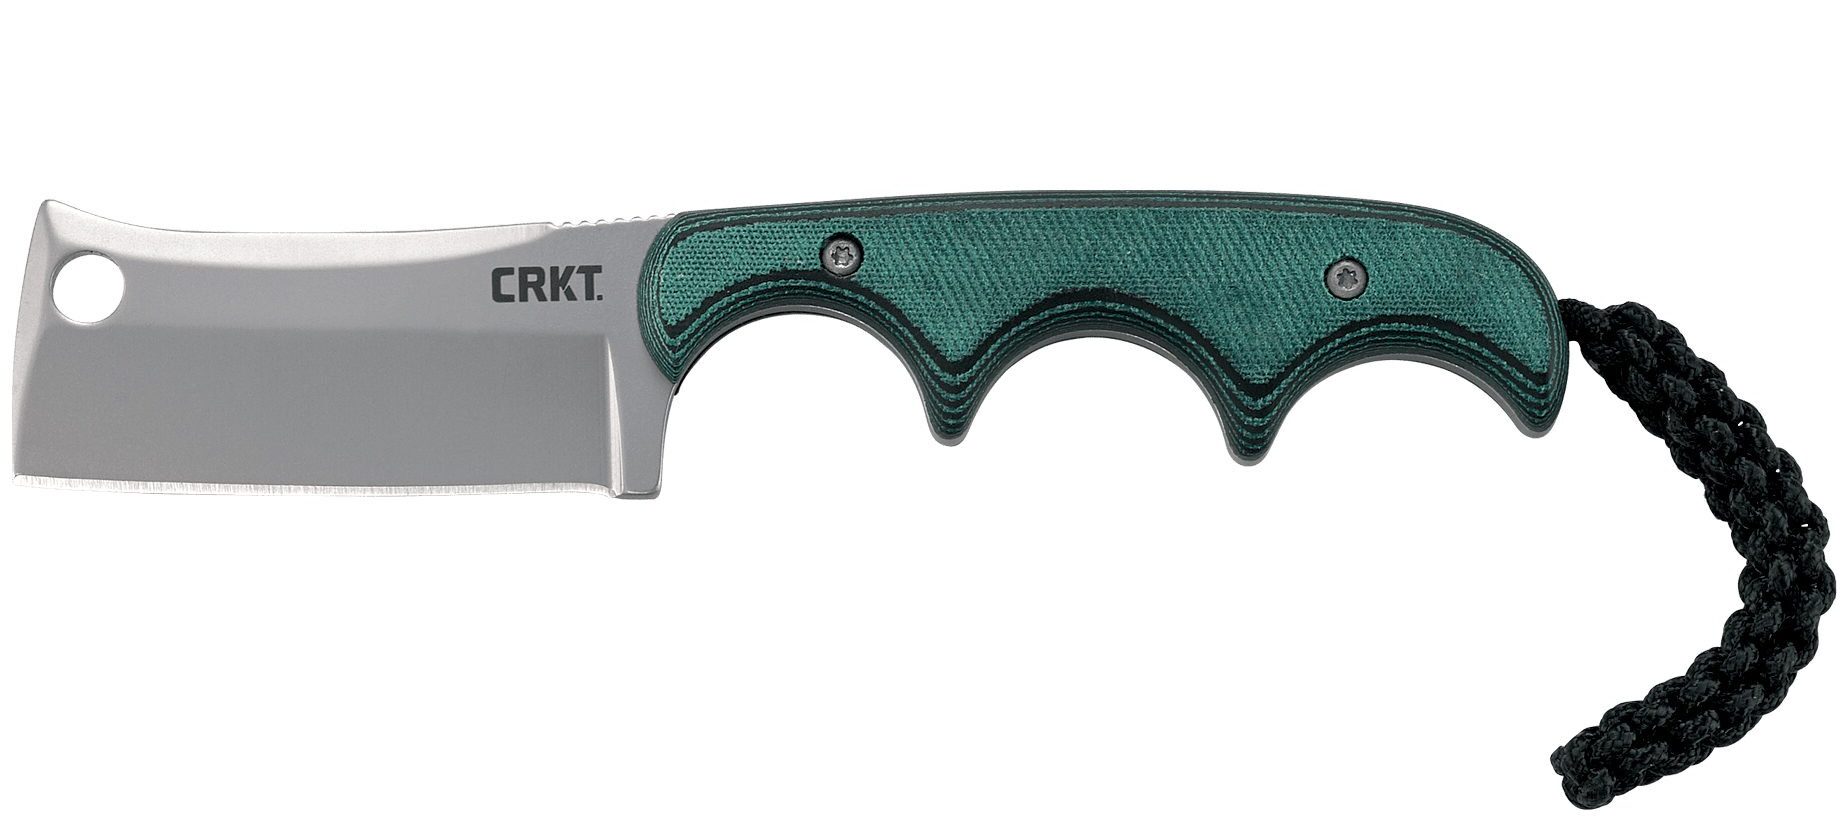 CRKT Cleaver with blue handle